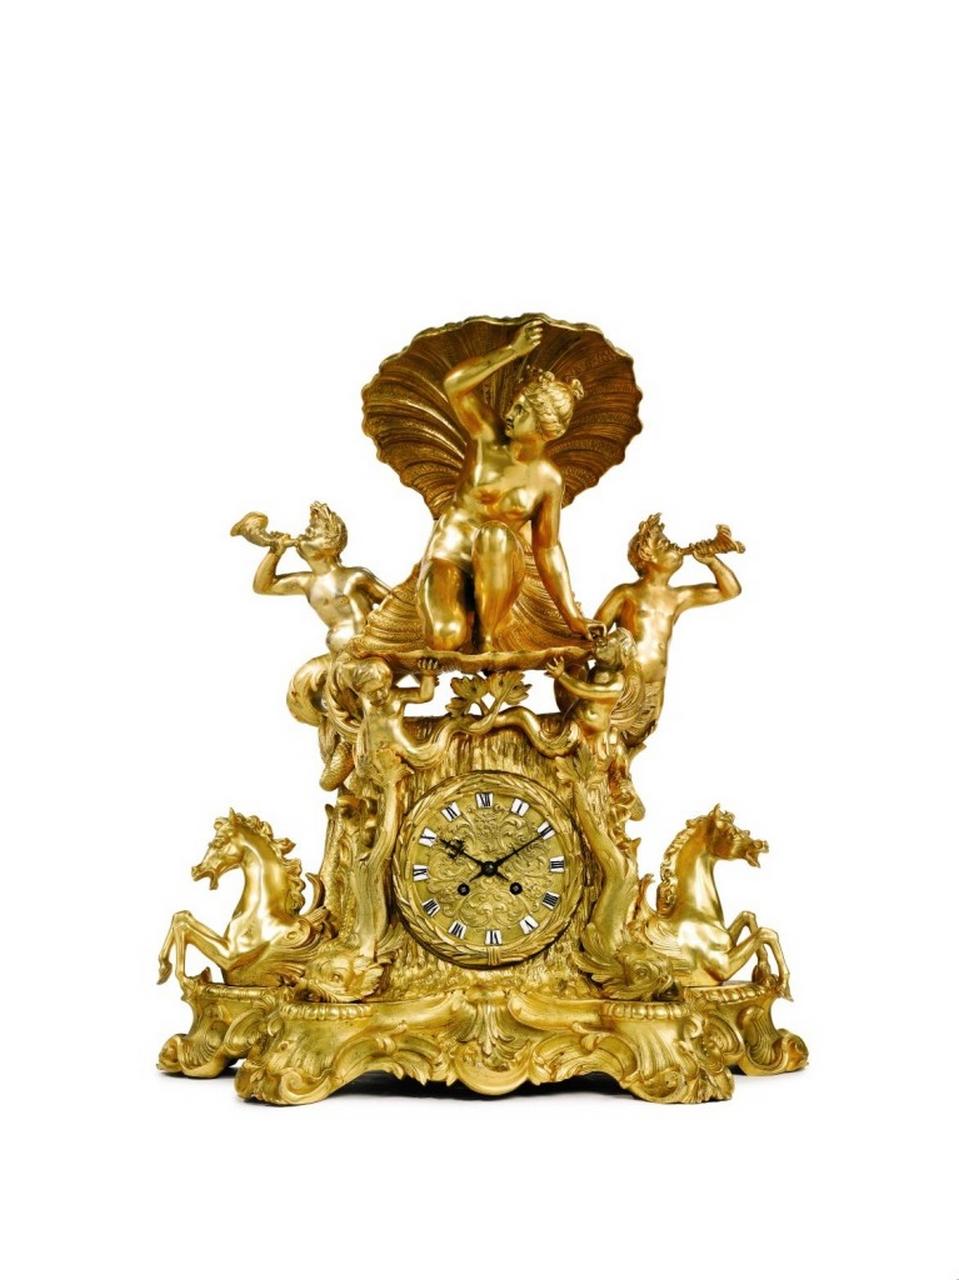 The Following Item we are Offering is a Large and Impressive 19th Century Museum Quality Louis XVI French Ormolu, Patinated Bronze Gilt Bronze Mantel Clock depicting the Birth of Venus, Magnificently done with Exquisite and Fascinating Detail. Taken